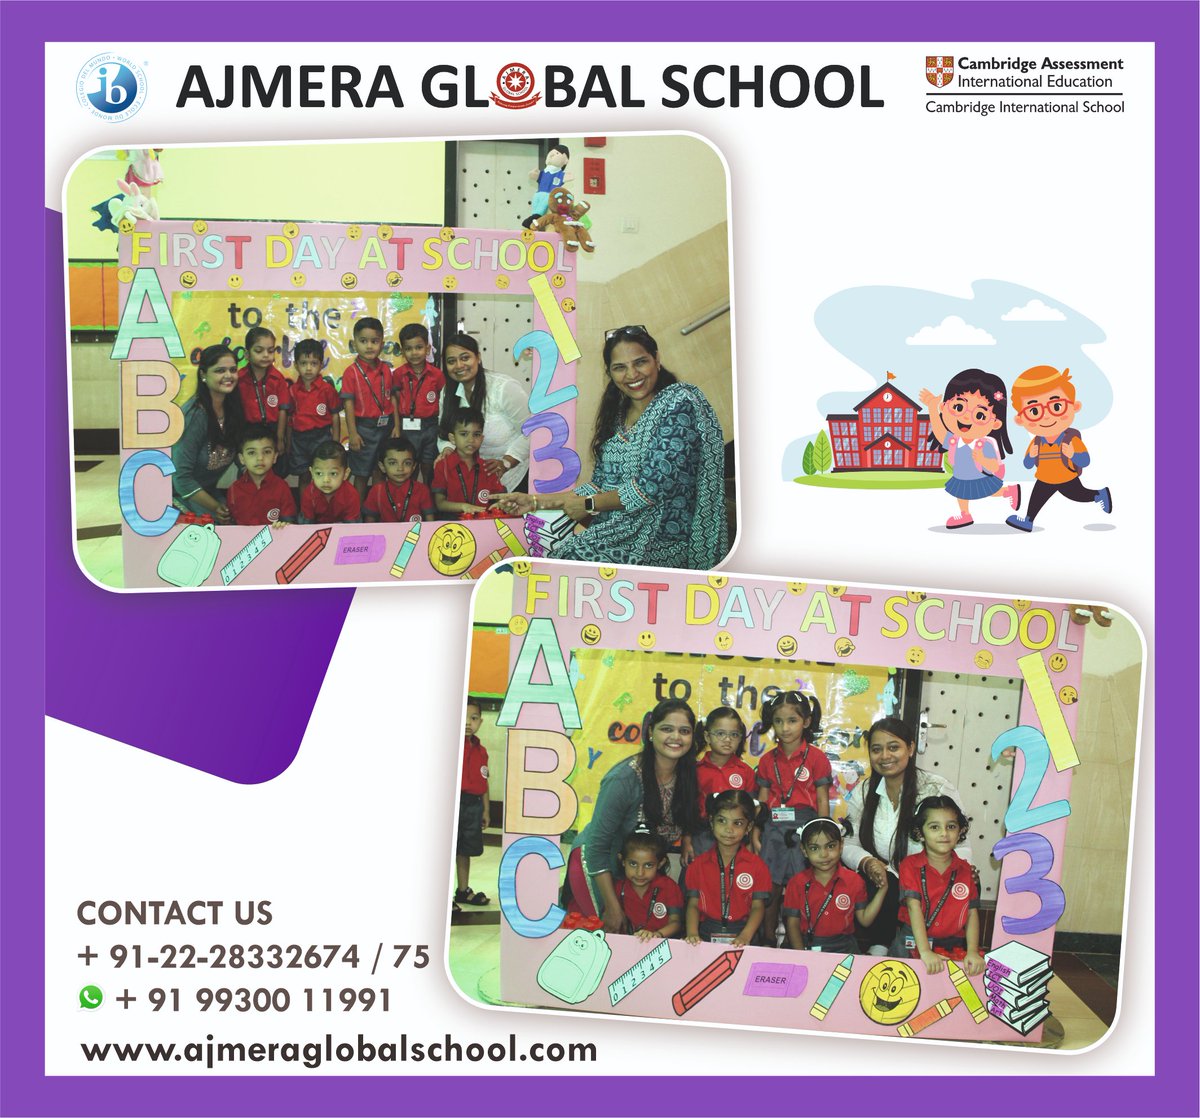 Yes! We are back 😀
Today AGS welcomed the students from K1 to PYP 5.

#leading schools
#leading schools in Borivali
# IGCSE
#Cambridge curriculum
#AGSITES
#ibpypschool
#pypschoolinsuburbs
#pypcurriculum
#welcomebacktoschool
#students
#readytolearn
#action